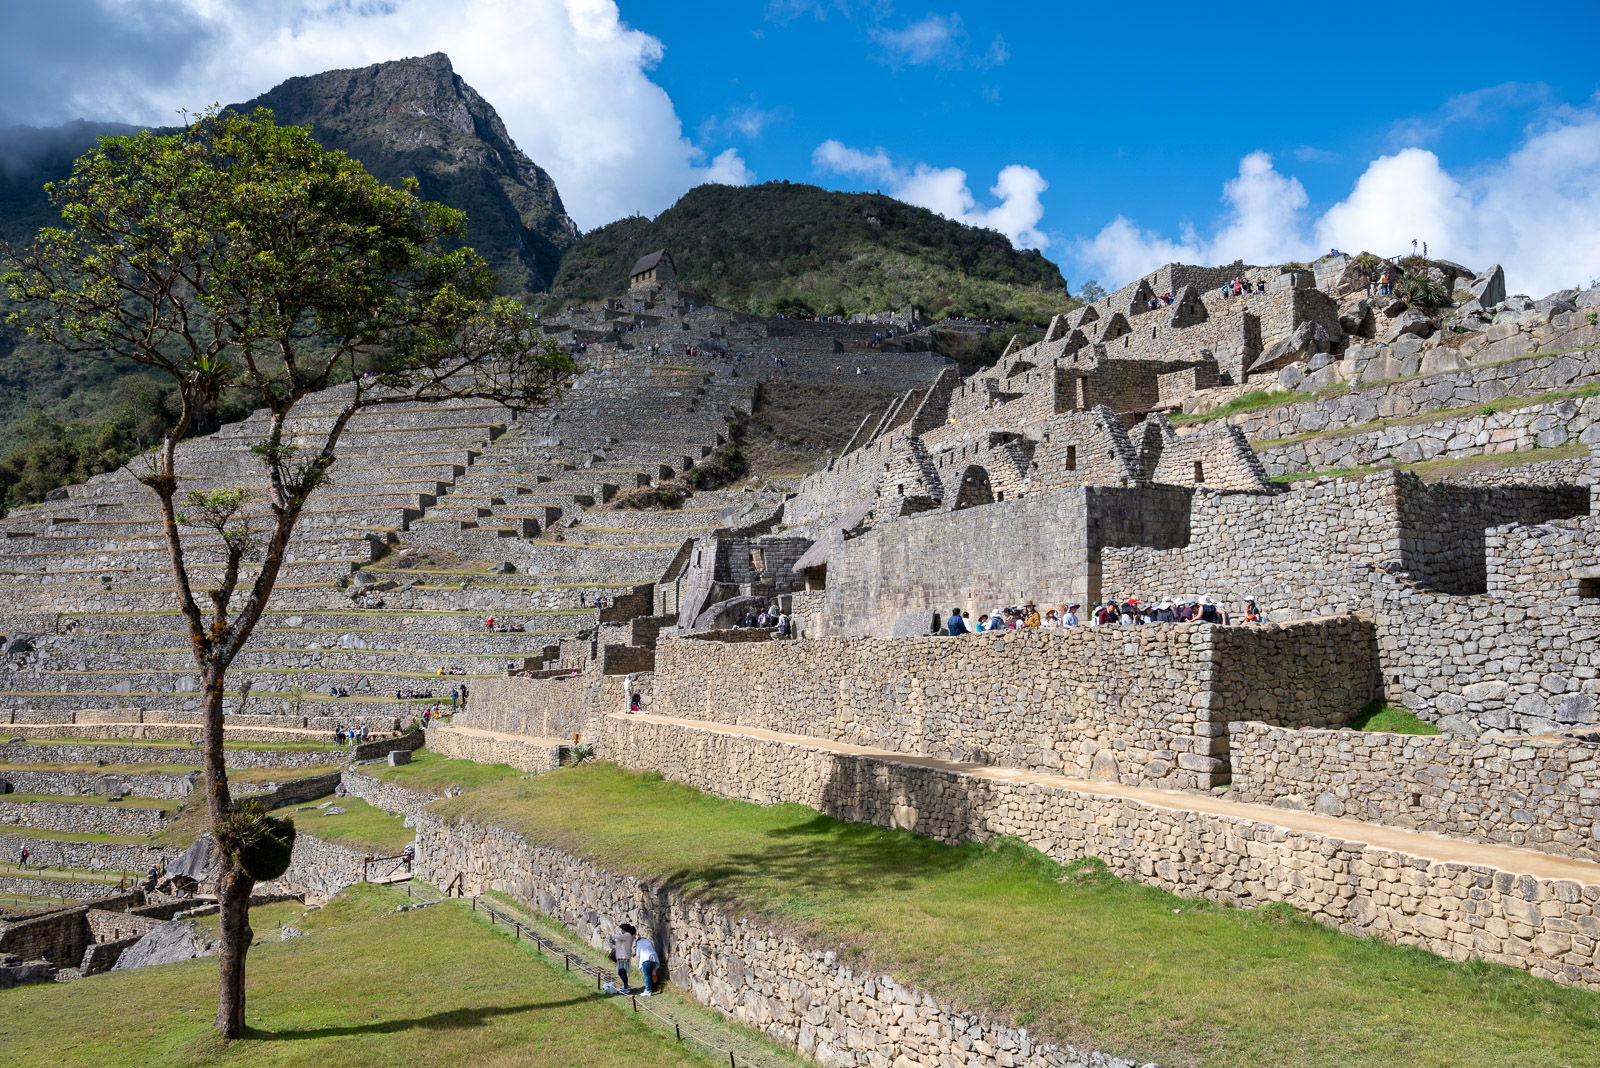 A single tree stands in the central plaza at Machu Picchu